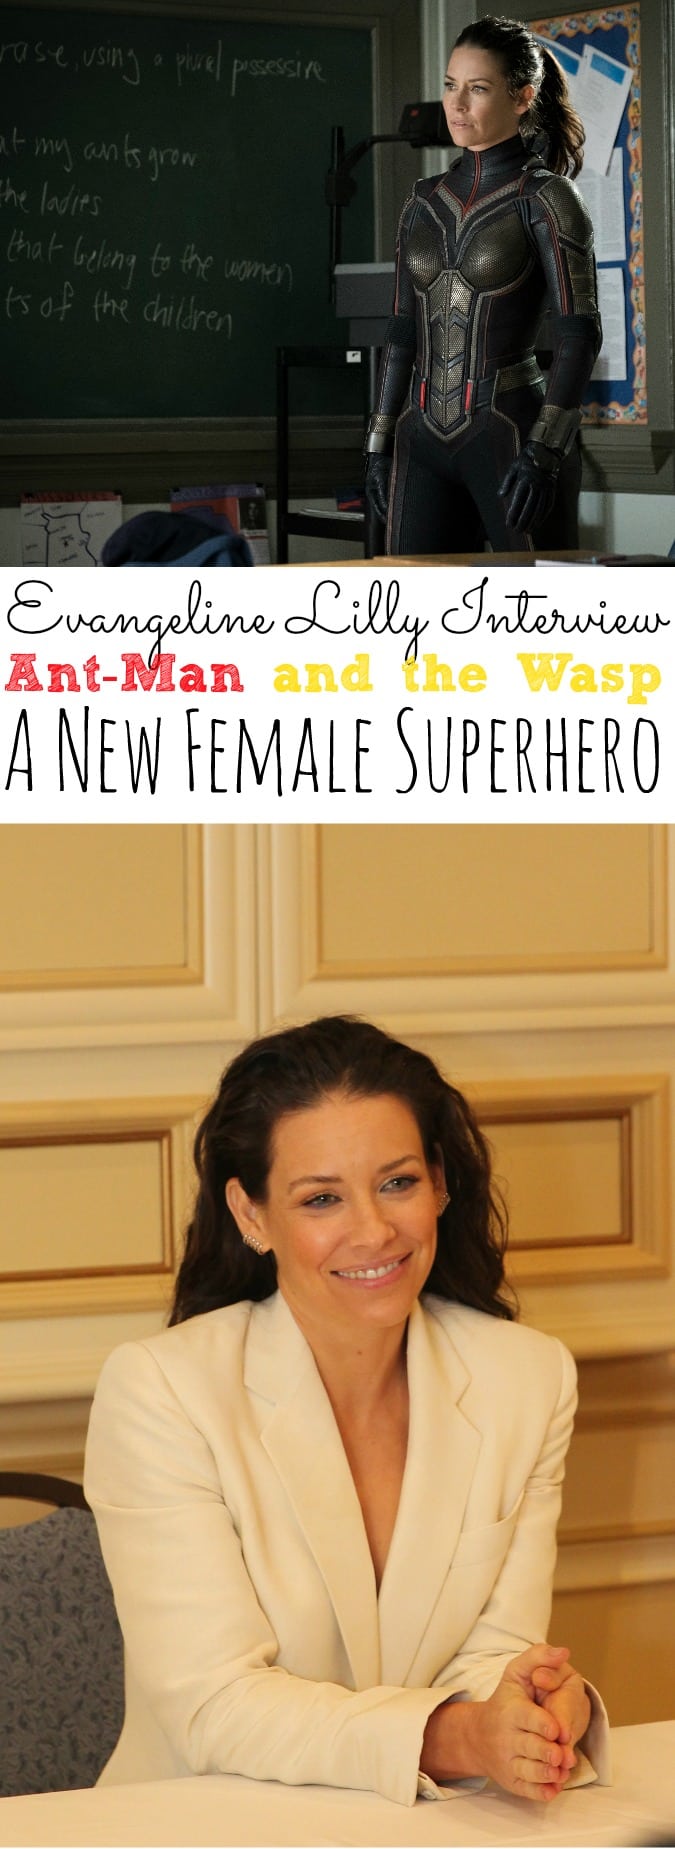 Evangeline Lilly Interview Ant-Man and the Wasp